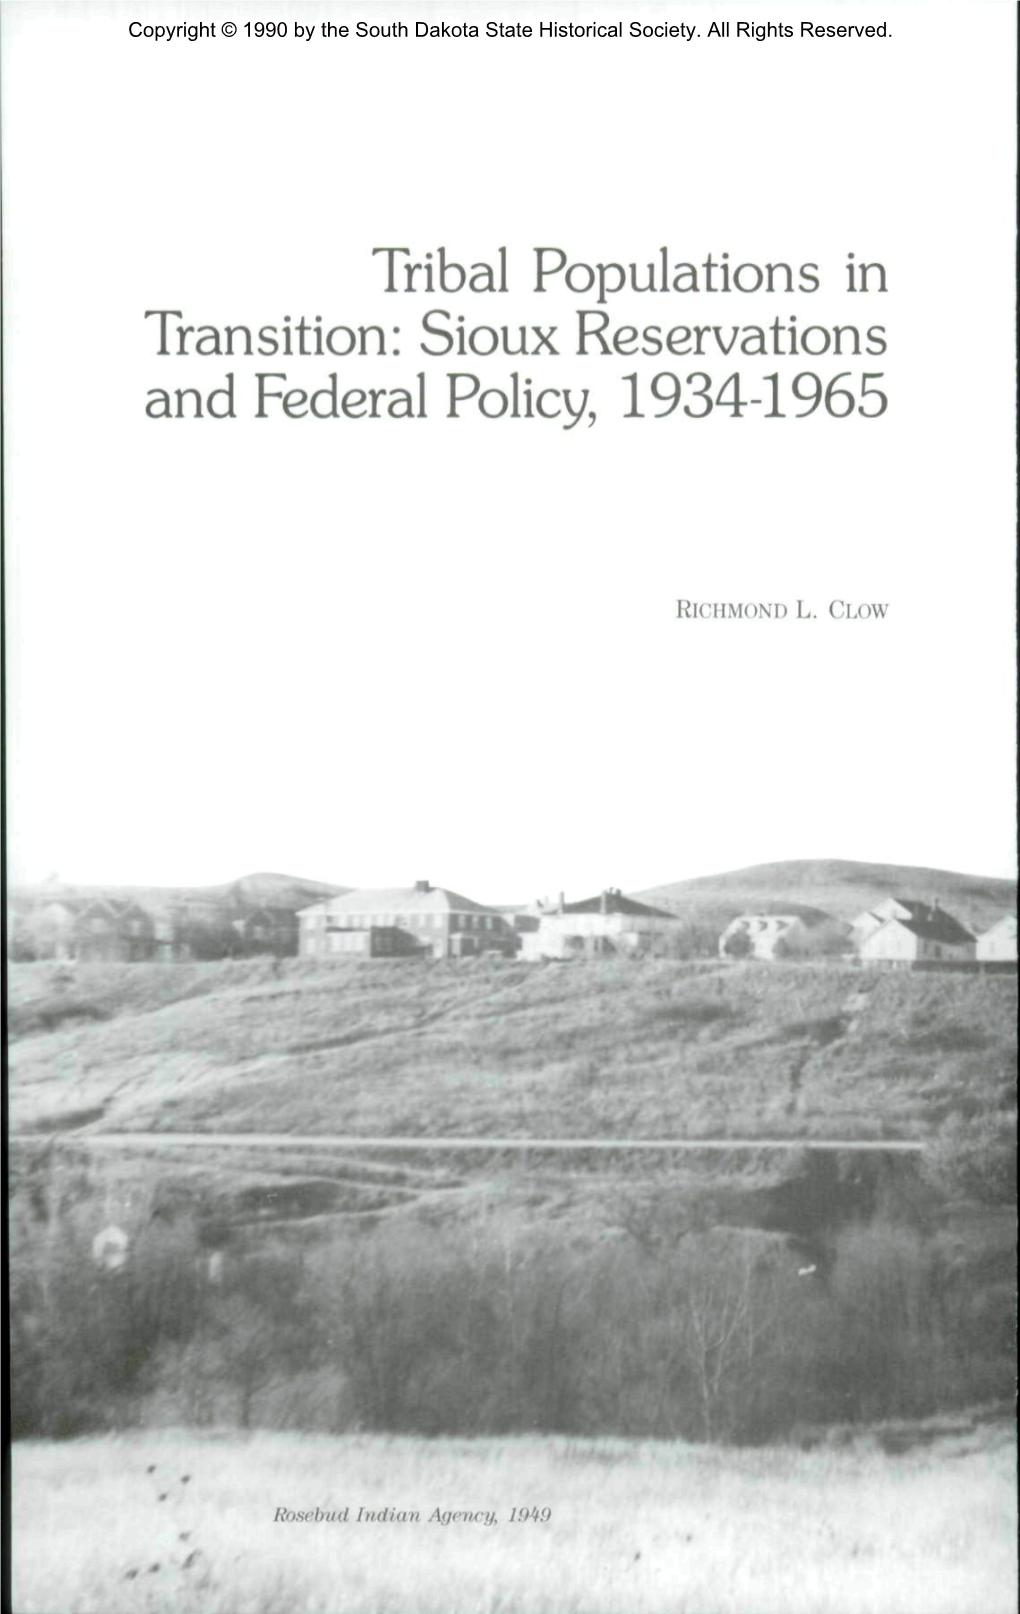 Tribal Populations in Transition: Sioux Reservations and Federal Policy, 1934-1965